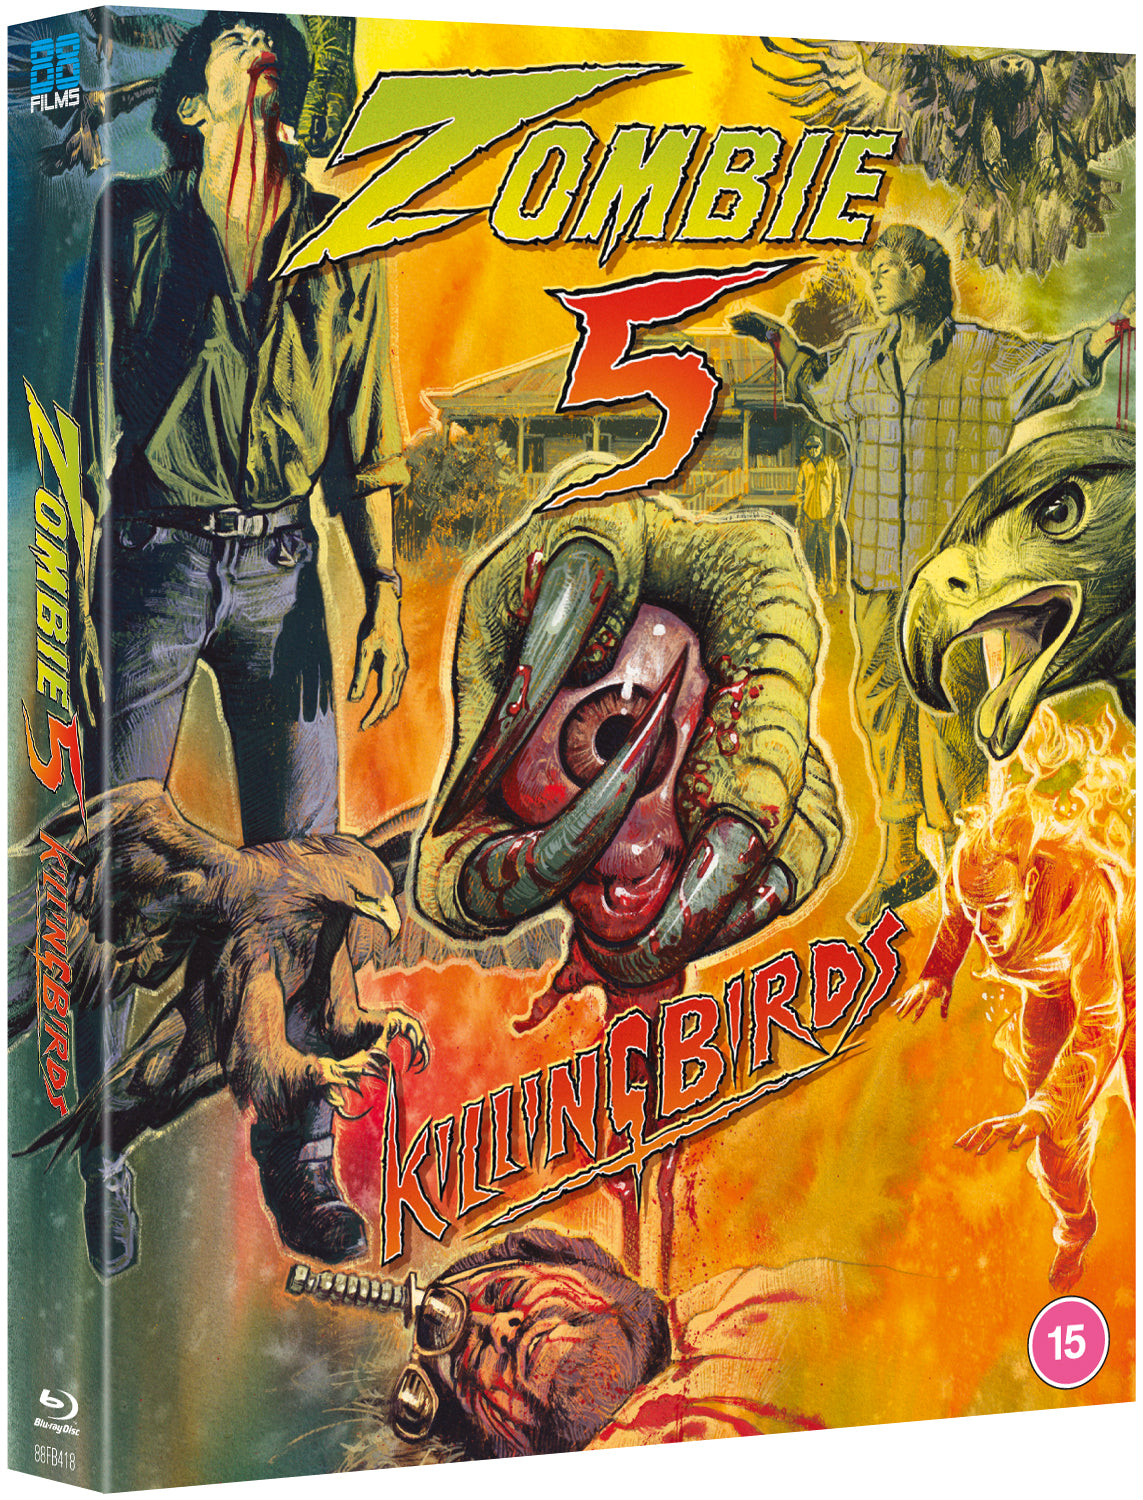 Zombie 5: Killing Birds - The Italian Collection 68 [THE LIMITED EDITION SERIES]